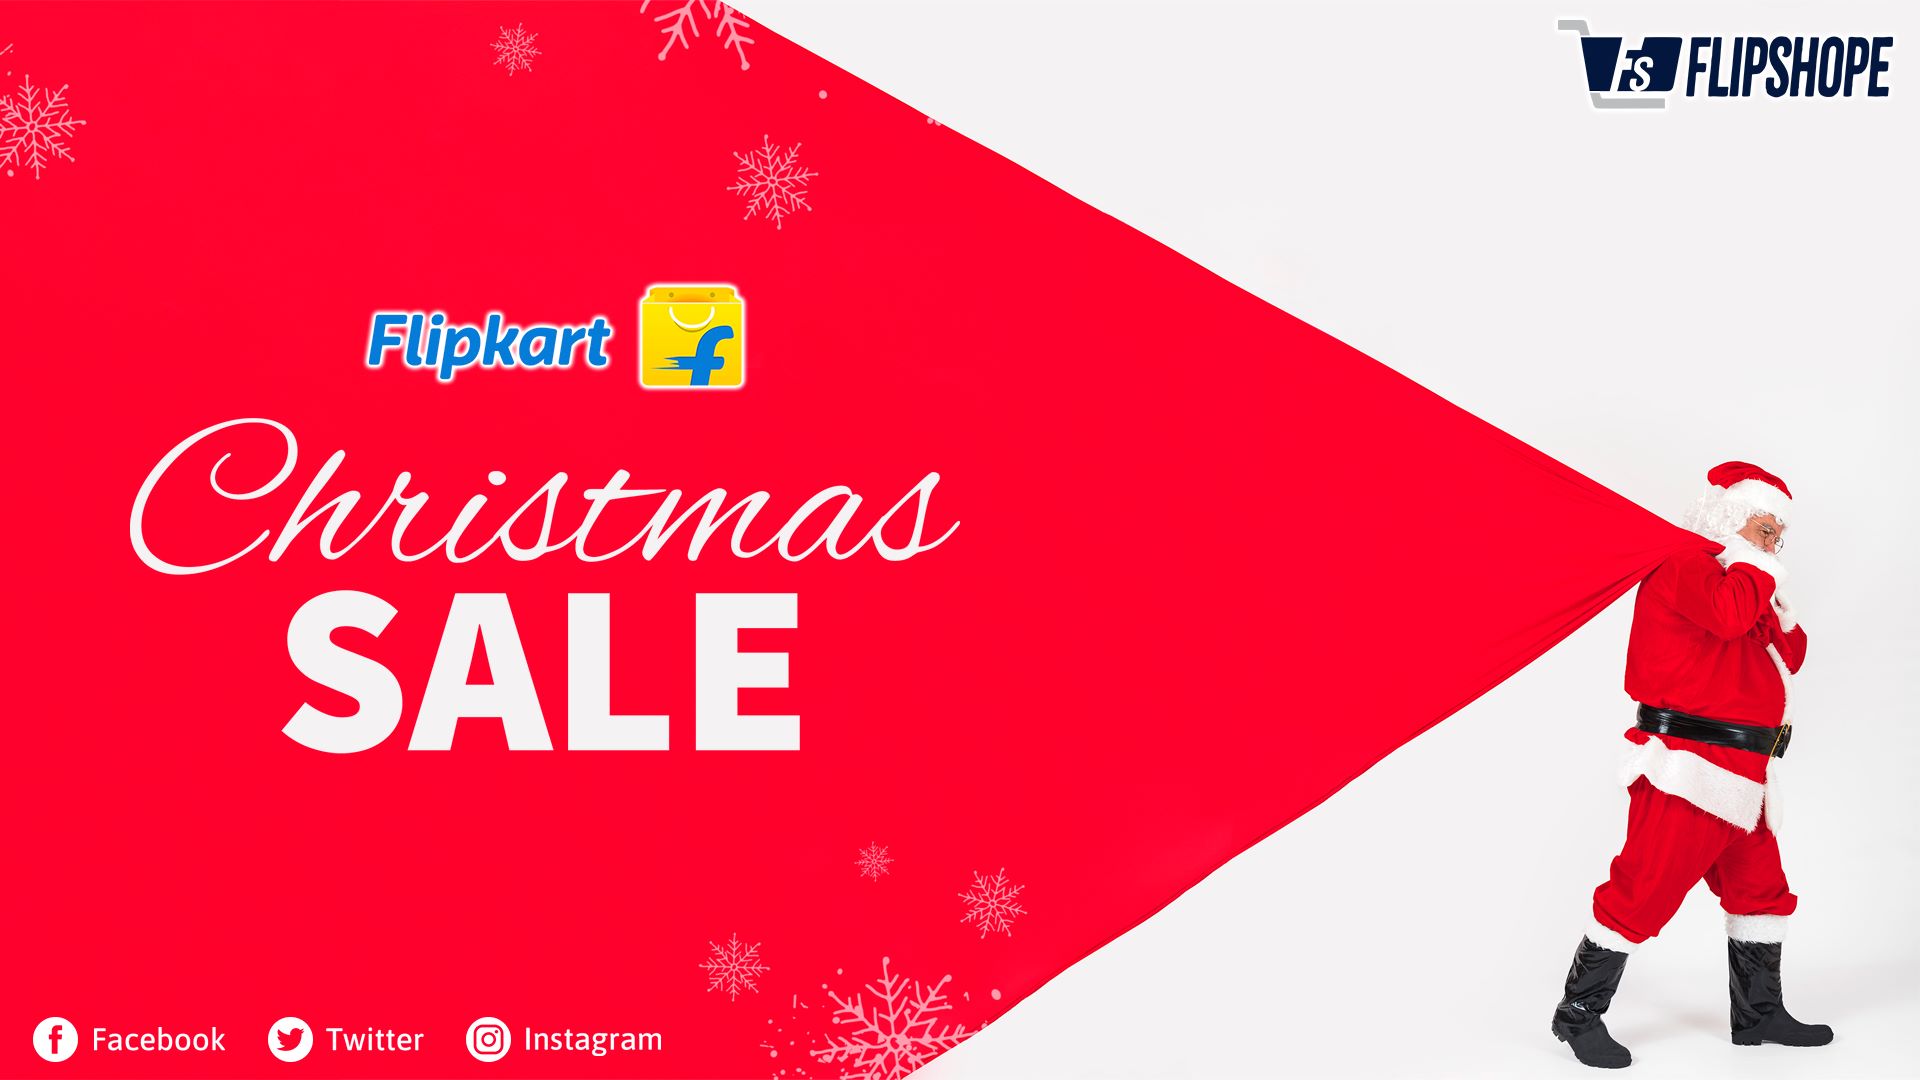 Flipkart Christmas Sale Date, Offers and More